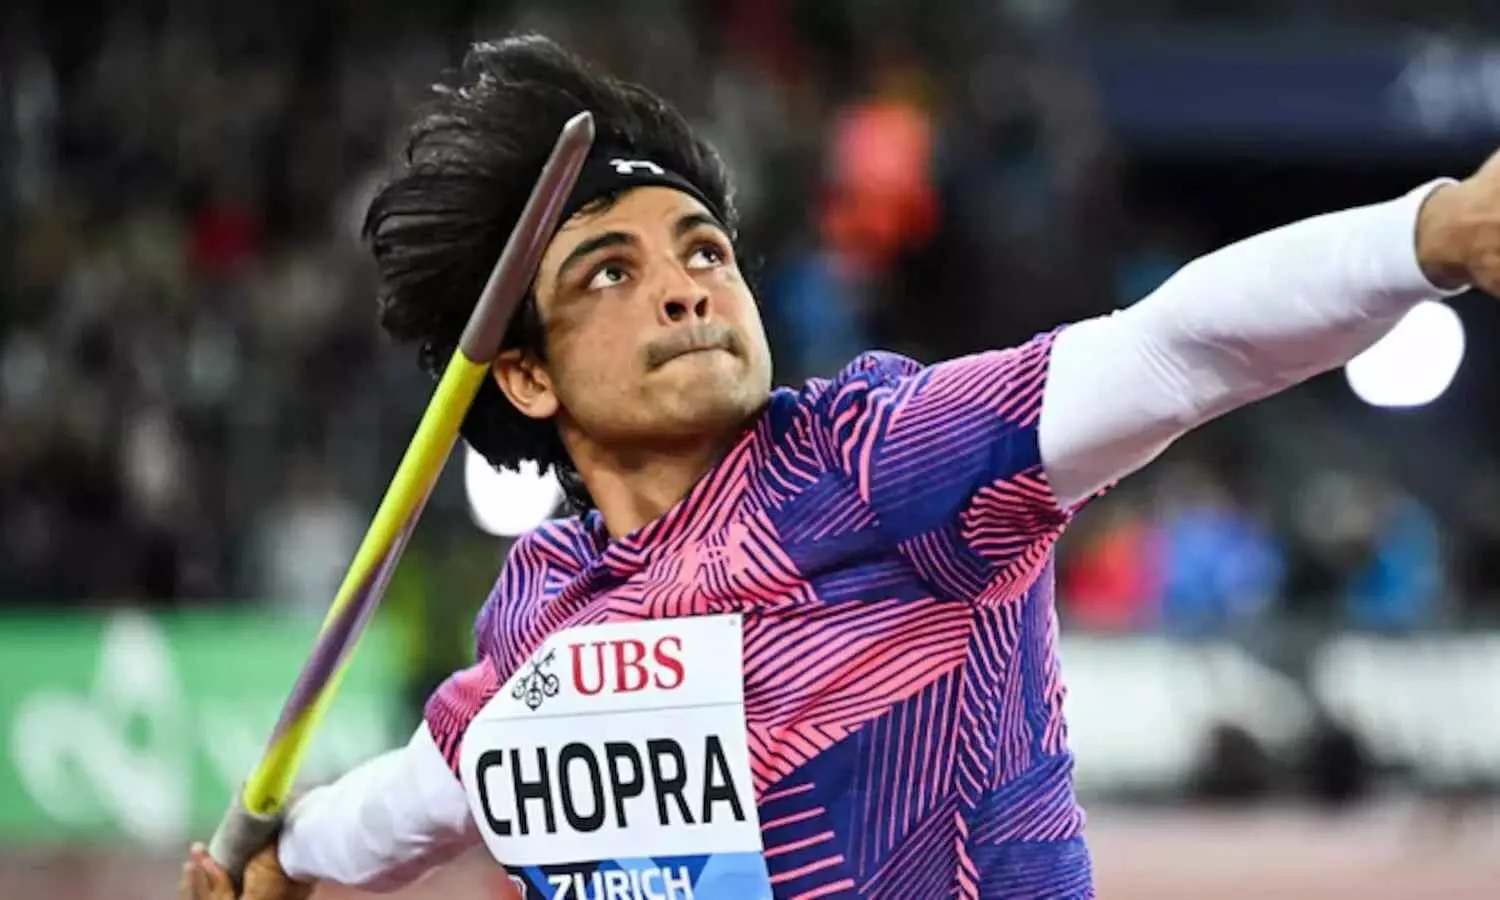 Neeraj Chopra issues clarification on missing Paris Diamond League, says the competition was never a part of his calendar